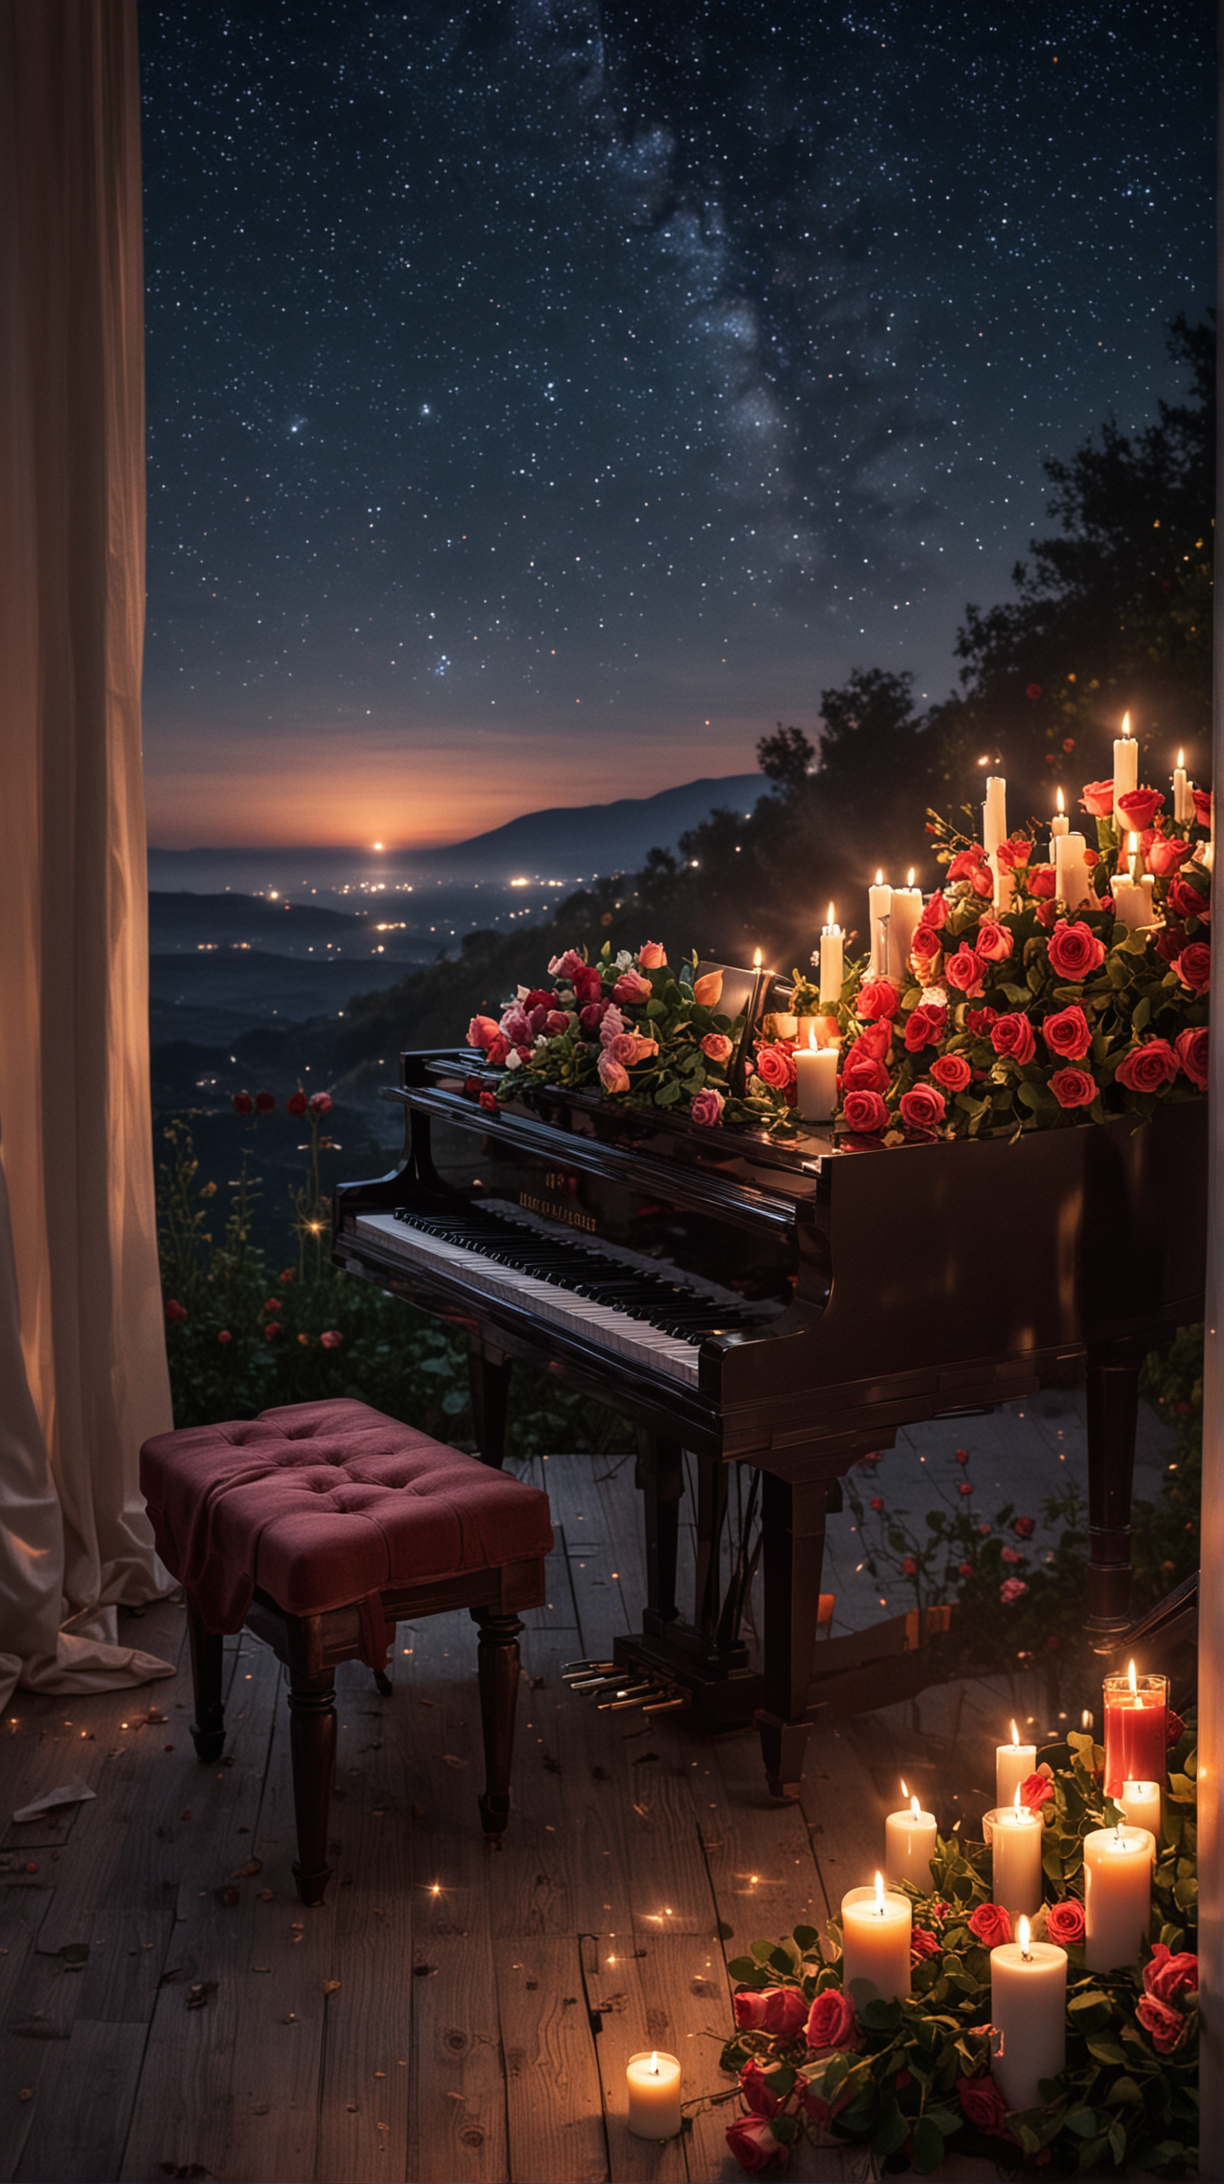 Romantic Evening Serenade with Piano and Candlelight Under Starry Sky